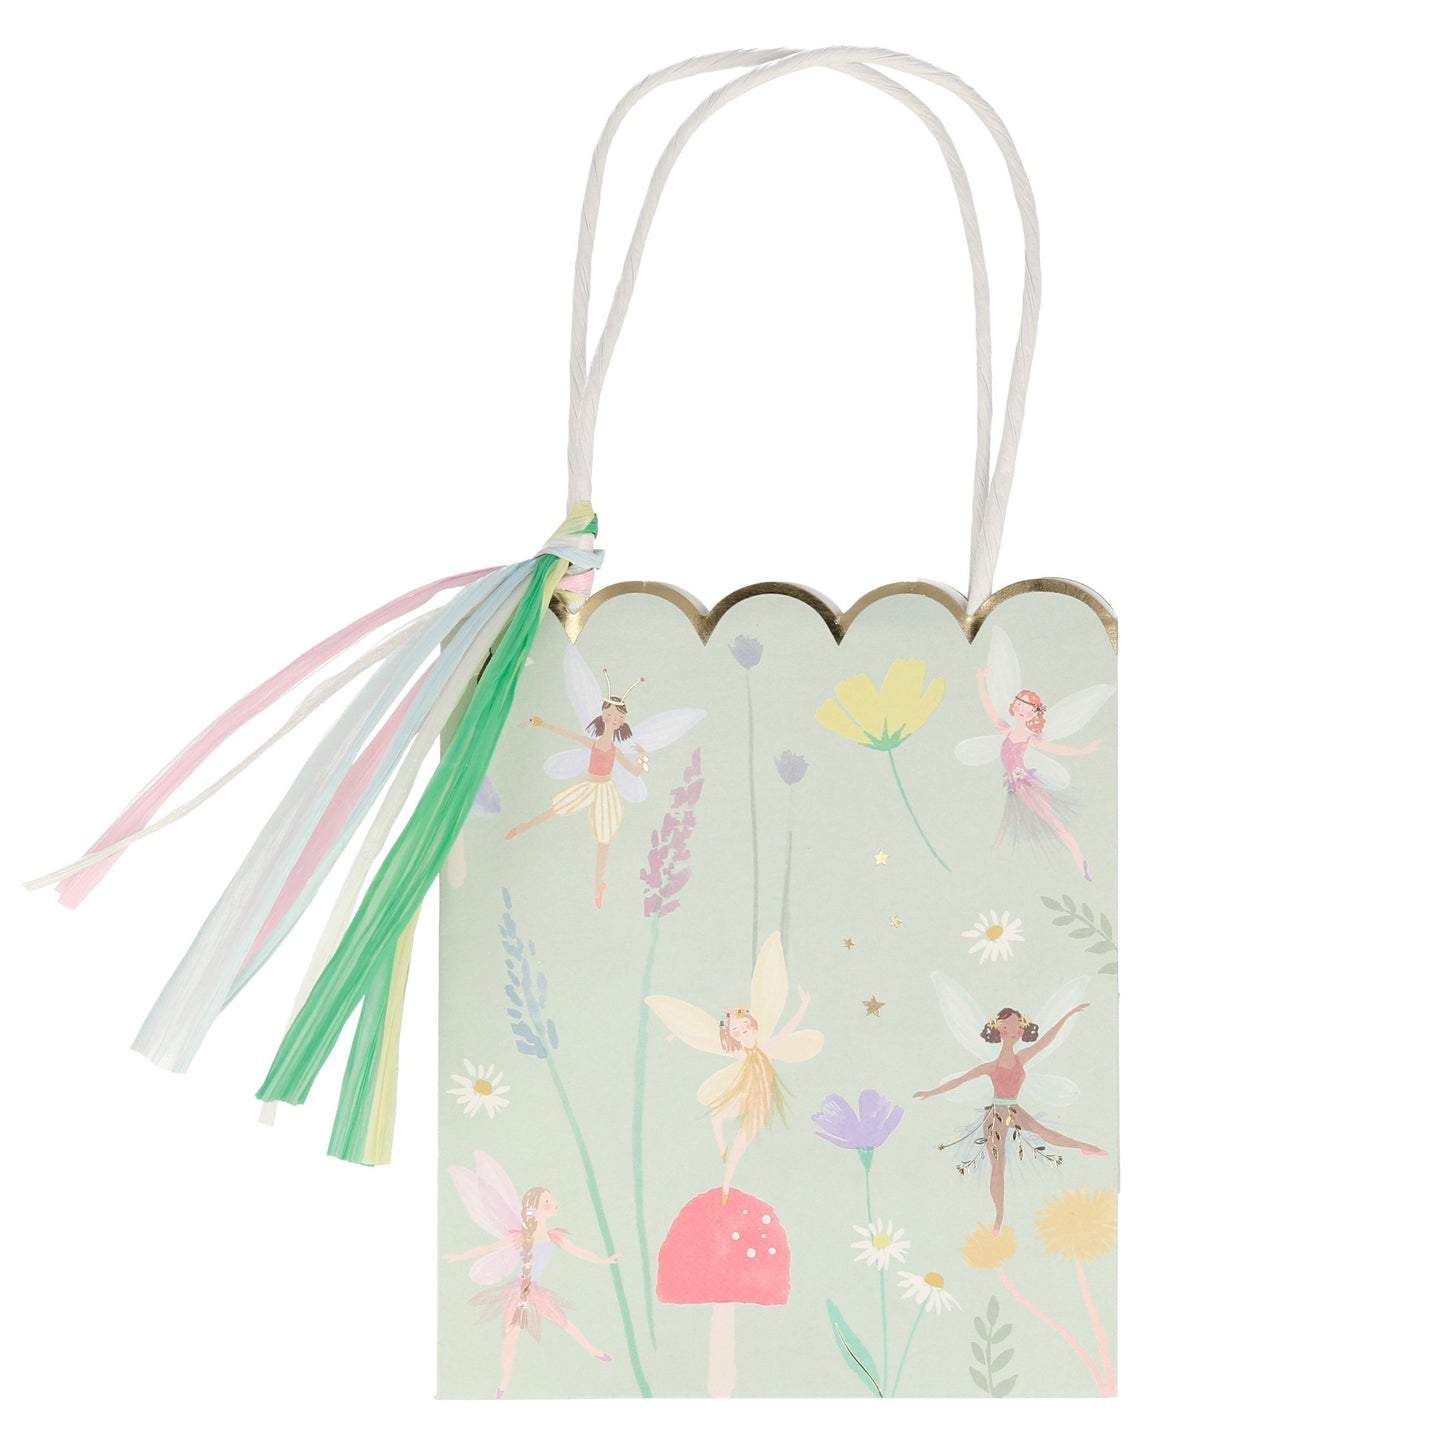 Fairy Party Bag in Mint with raffia tassels and printed with fairies, toadstools and lilac flowers